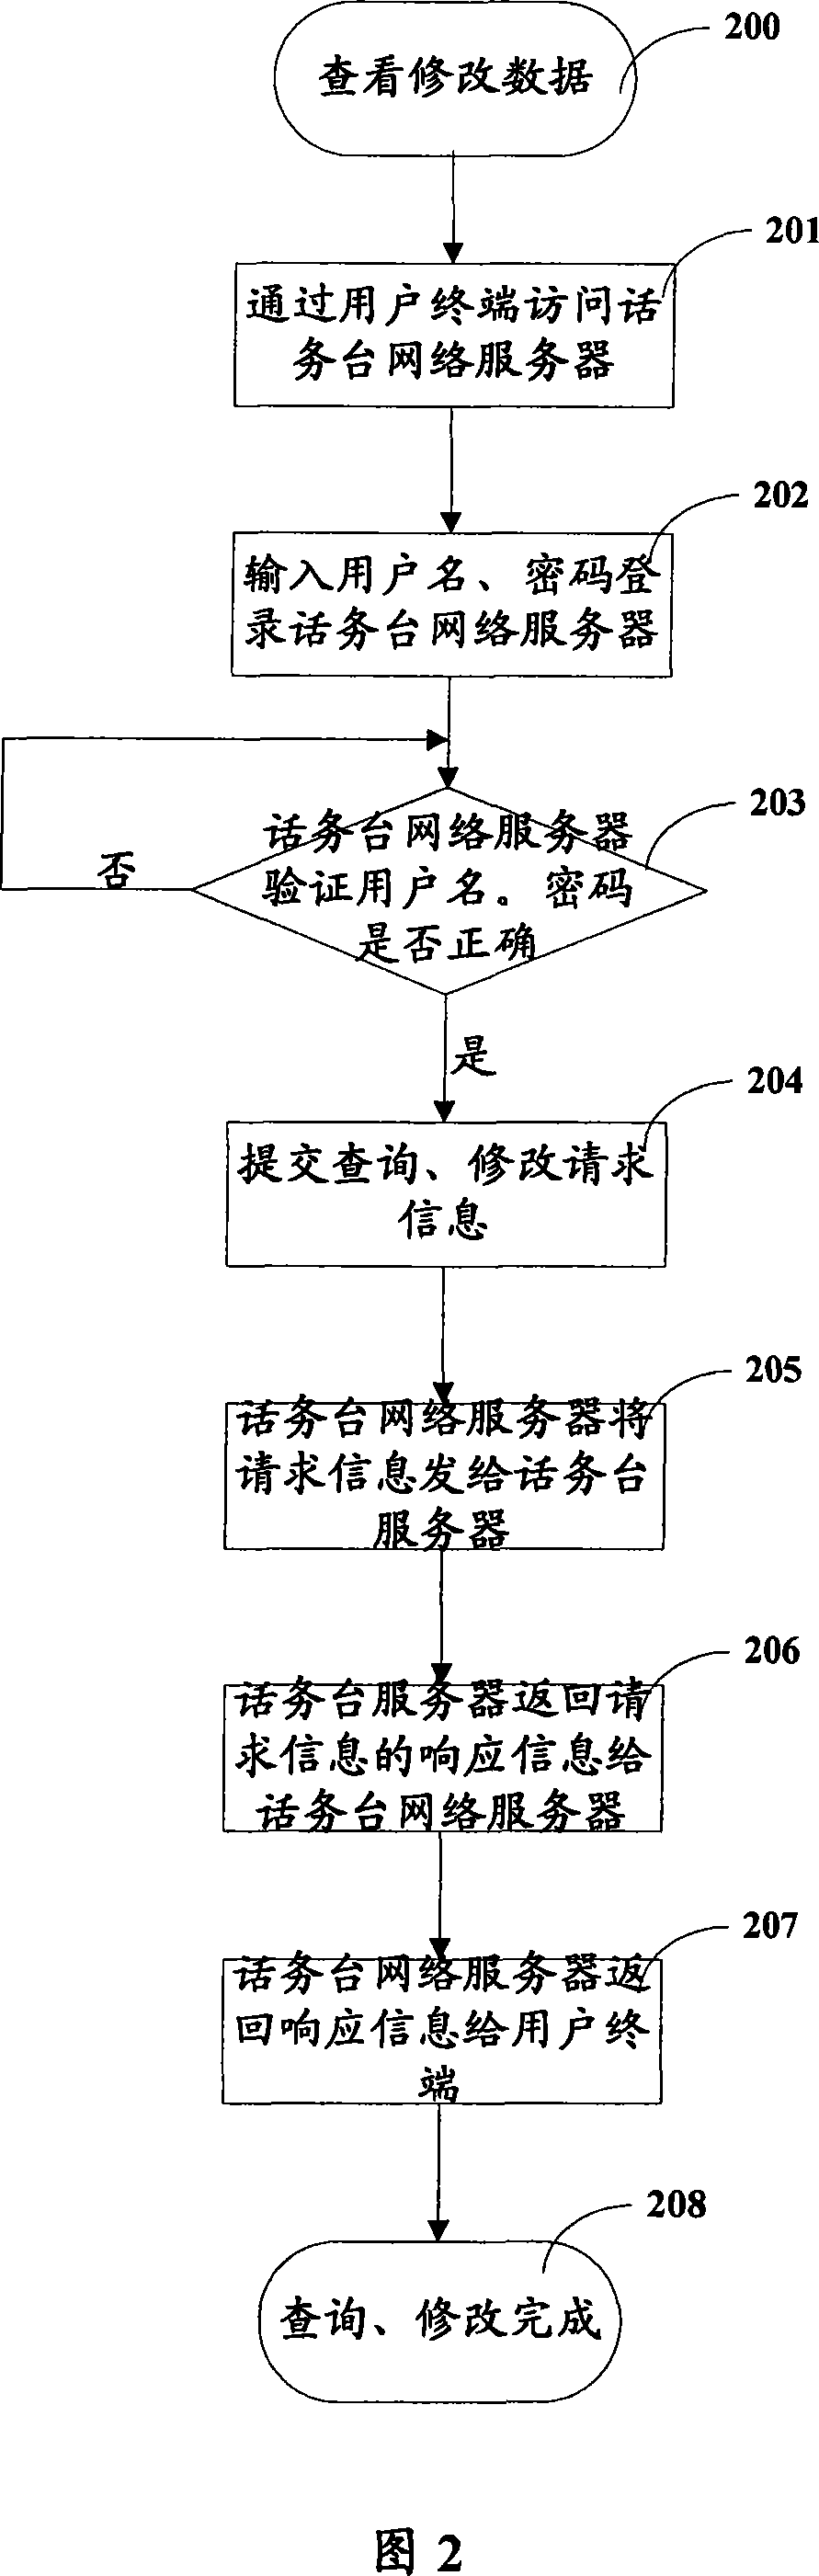 Method and system for console management adopting network